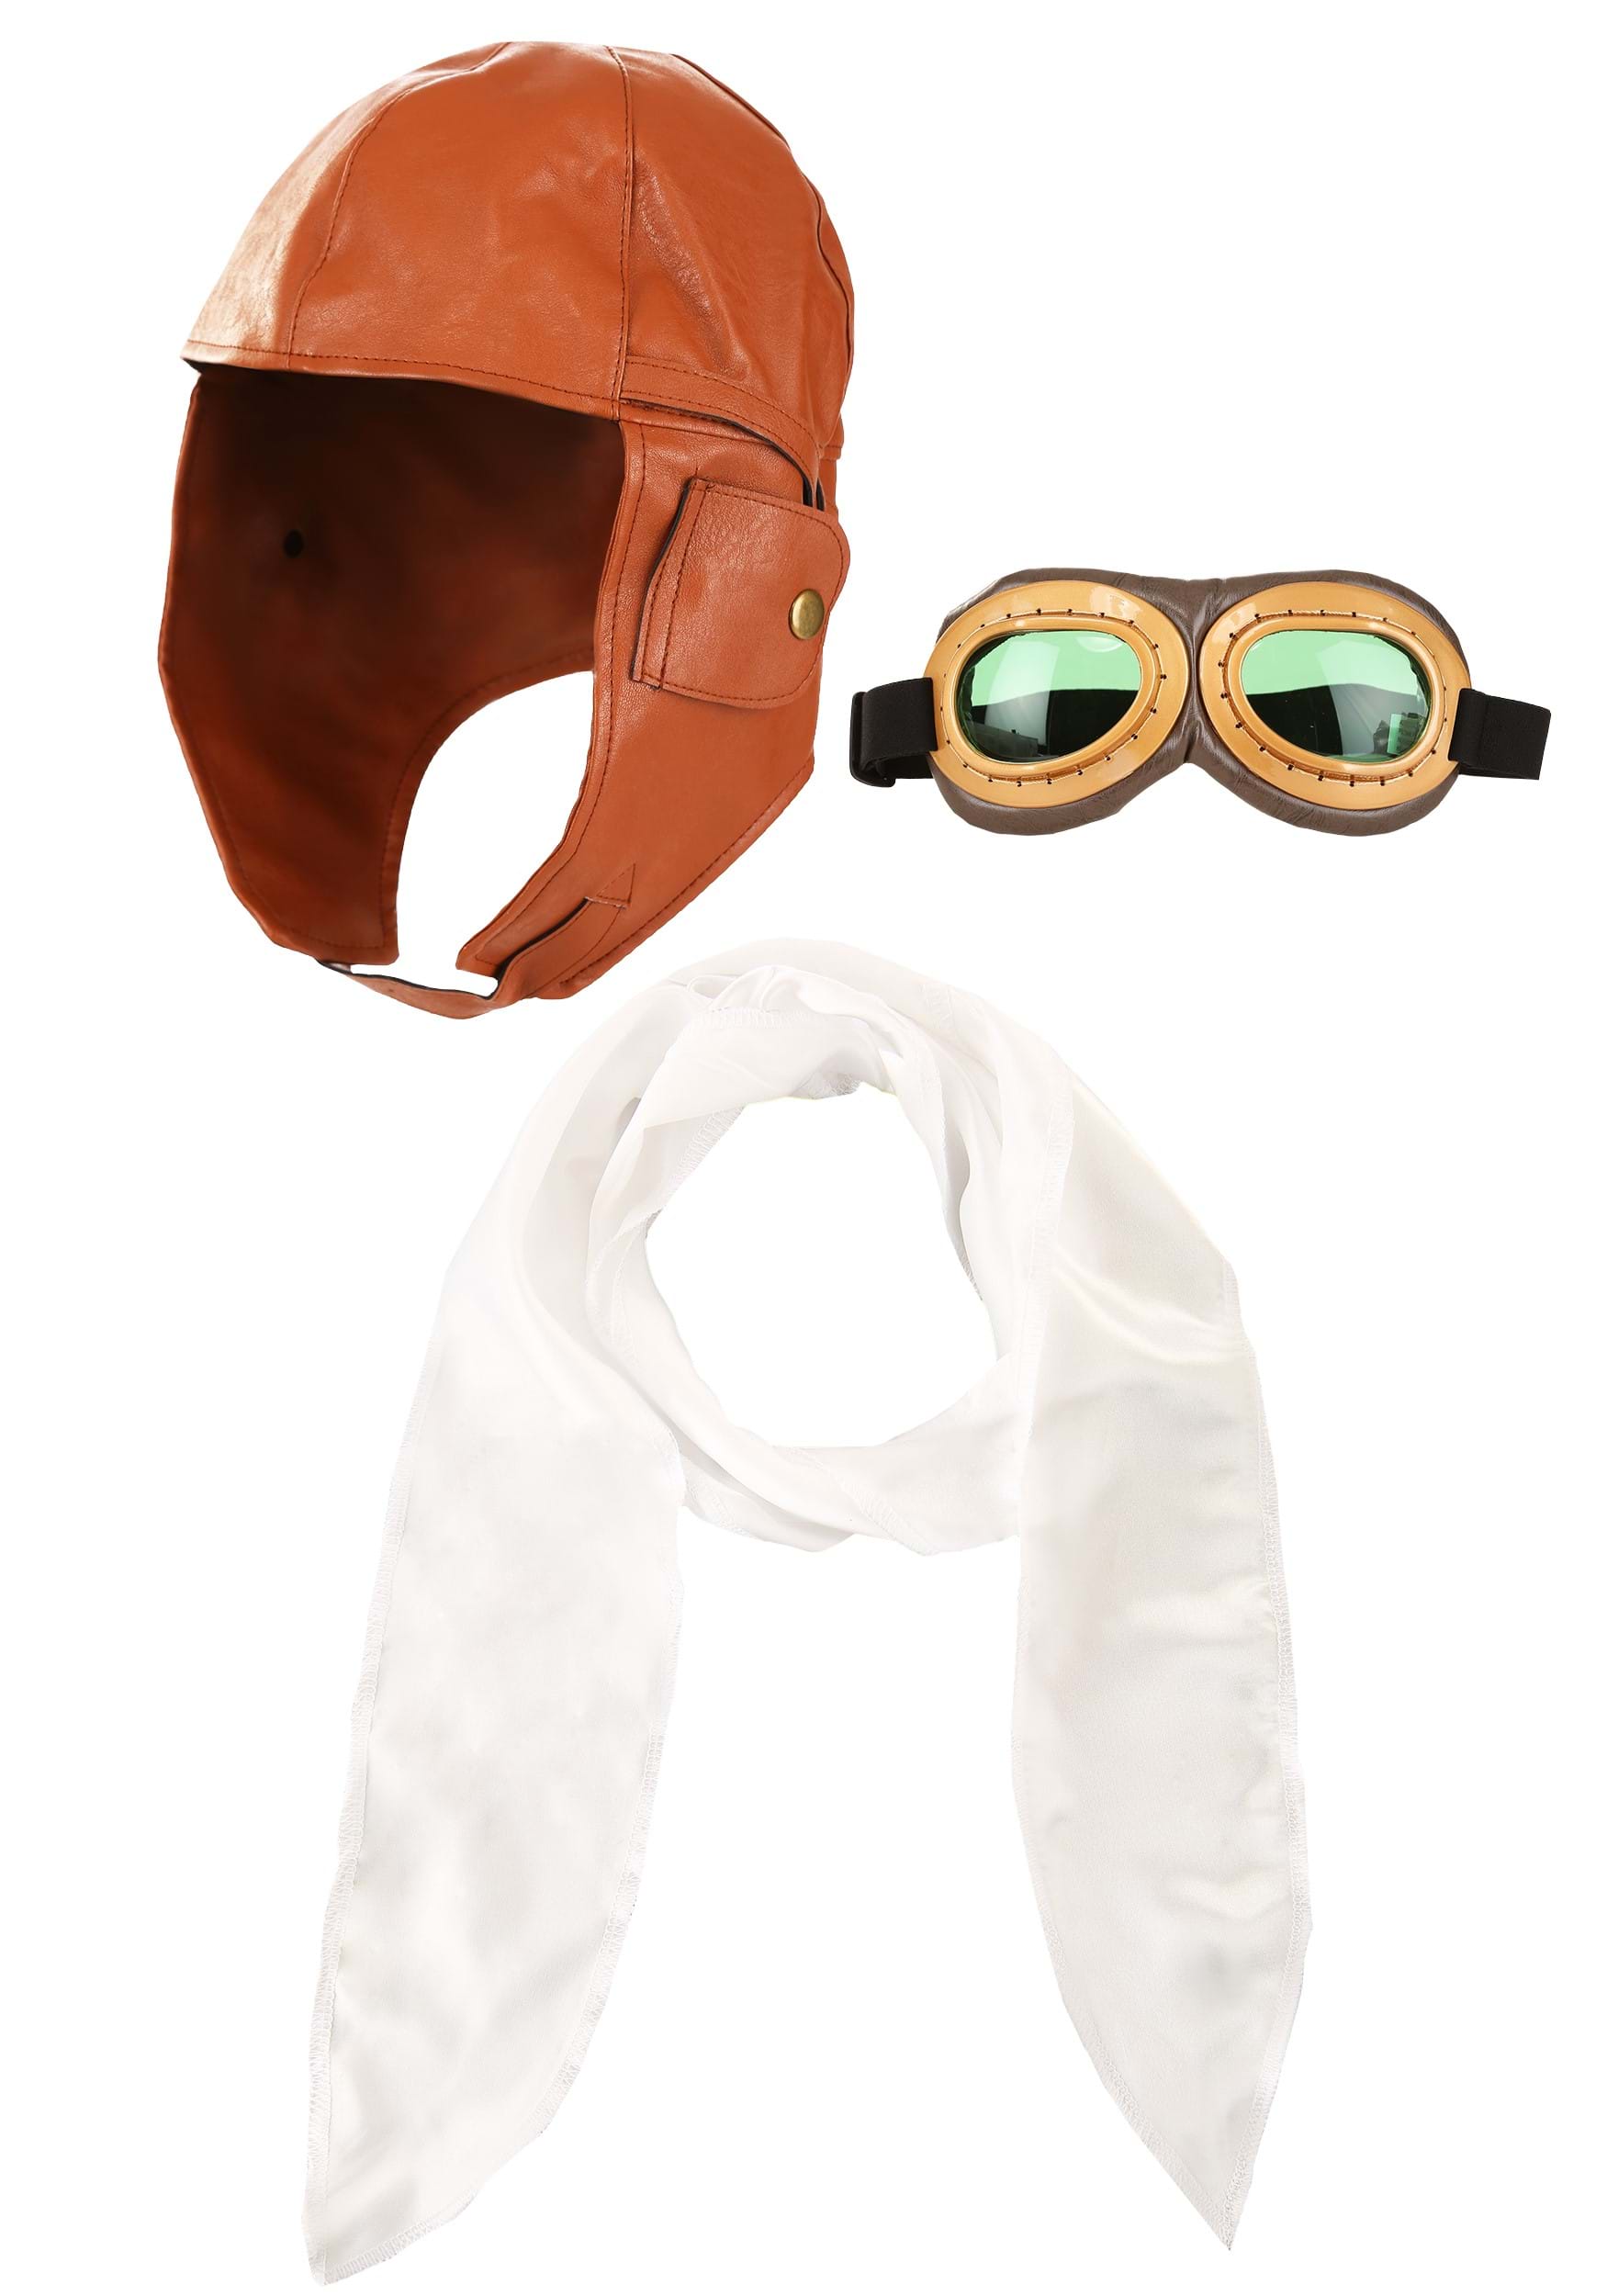 Amelia Earhart Costume Accessory Kit , Historical Figures Costumes & Accessories